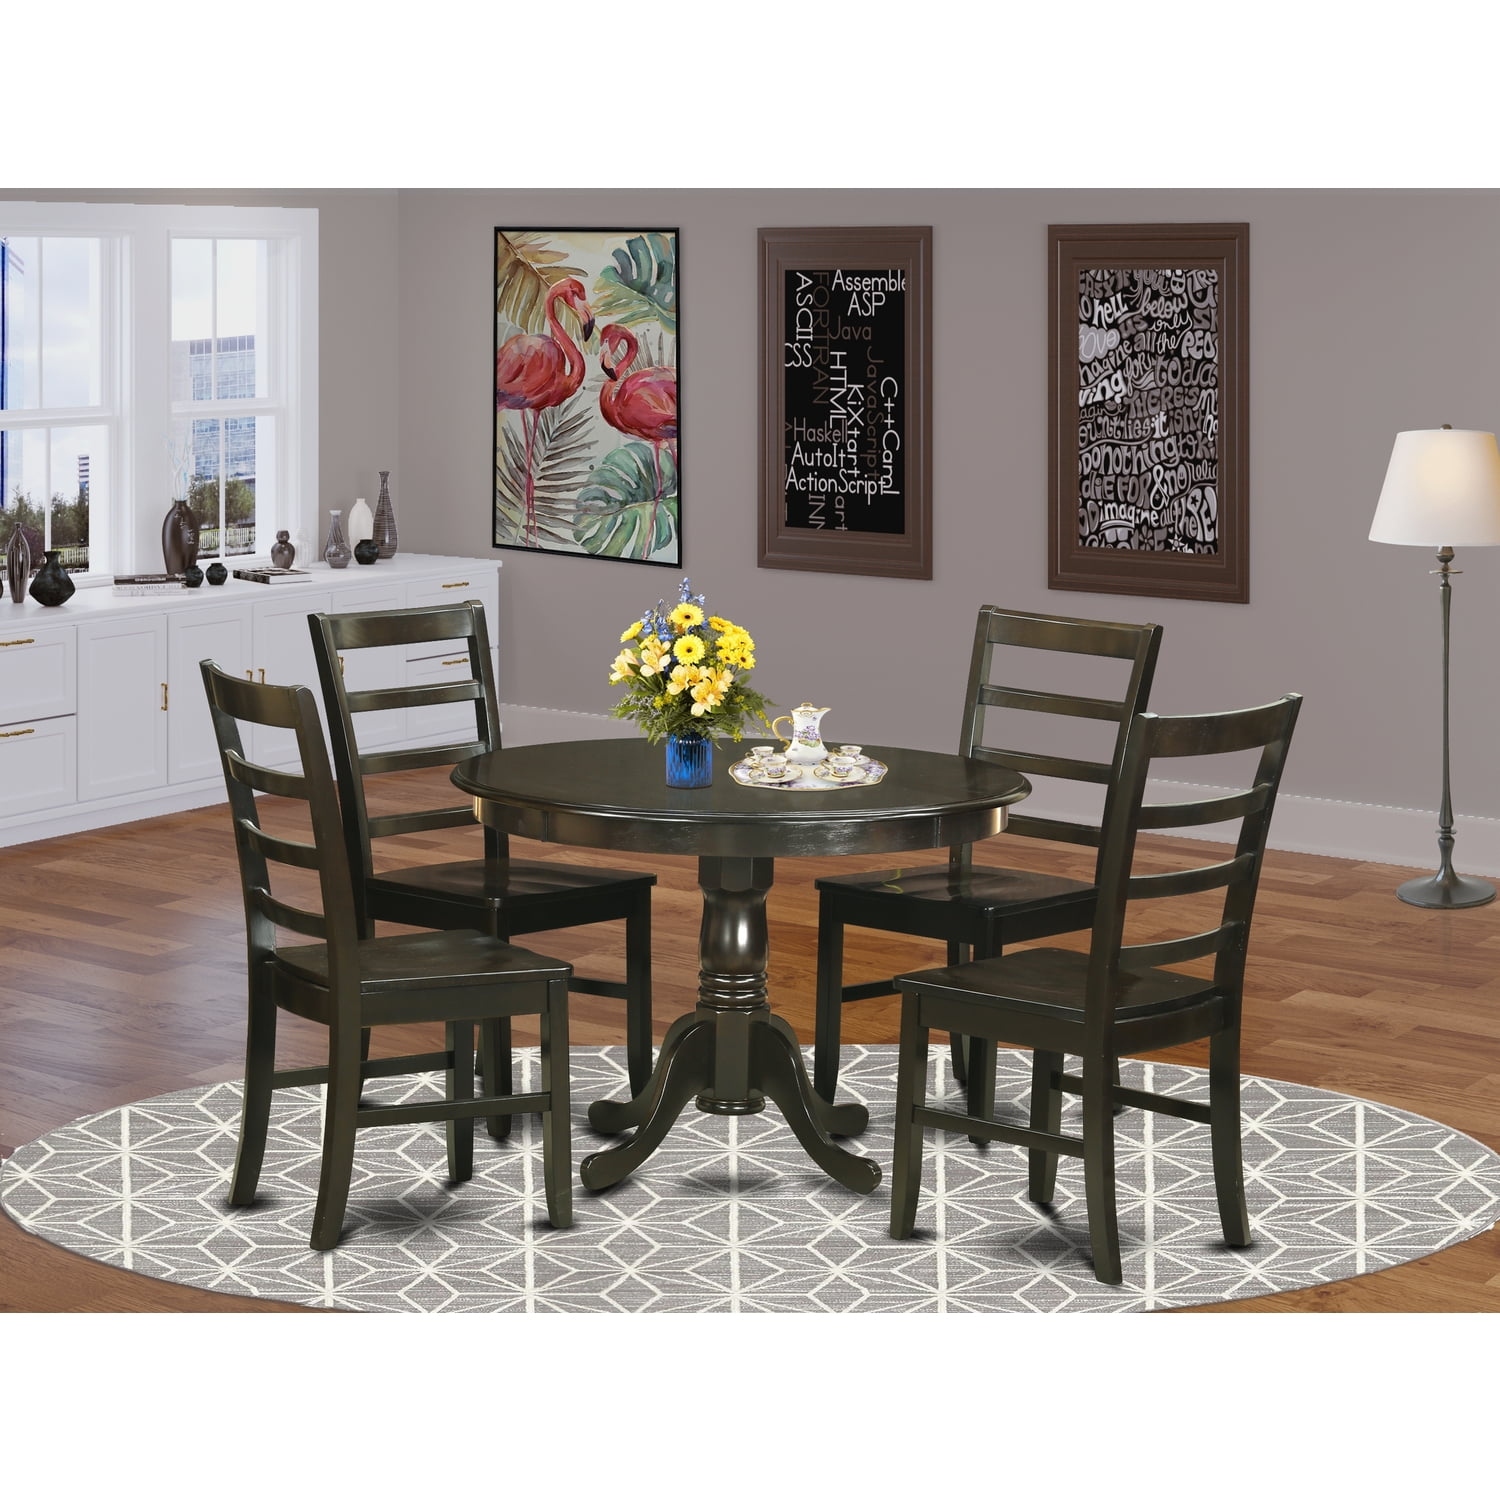 Small Kitchen Table Set-Dining Table And Dinette Chairs-Finish